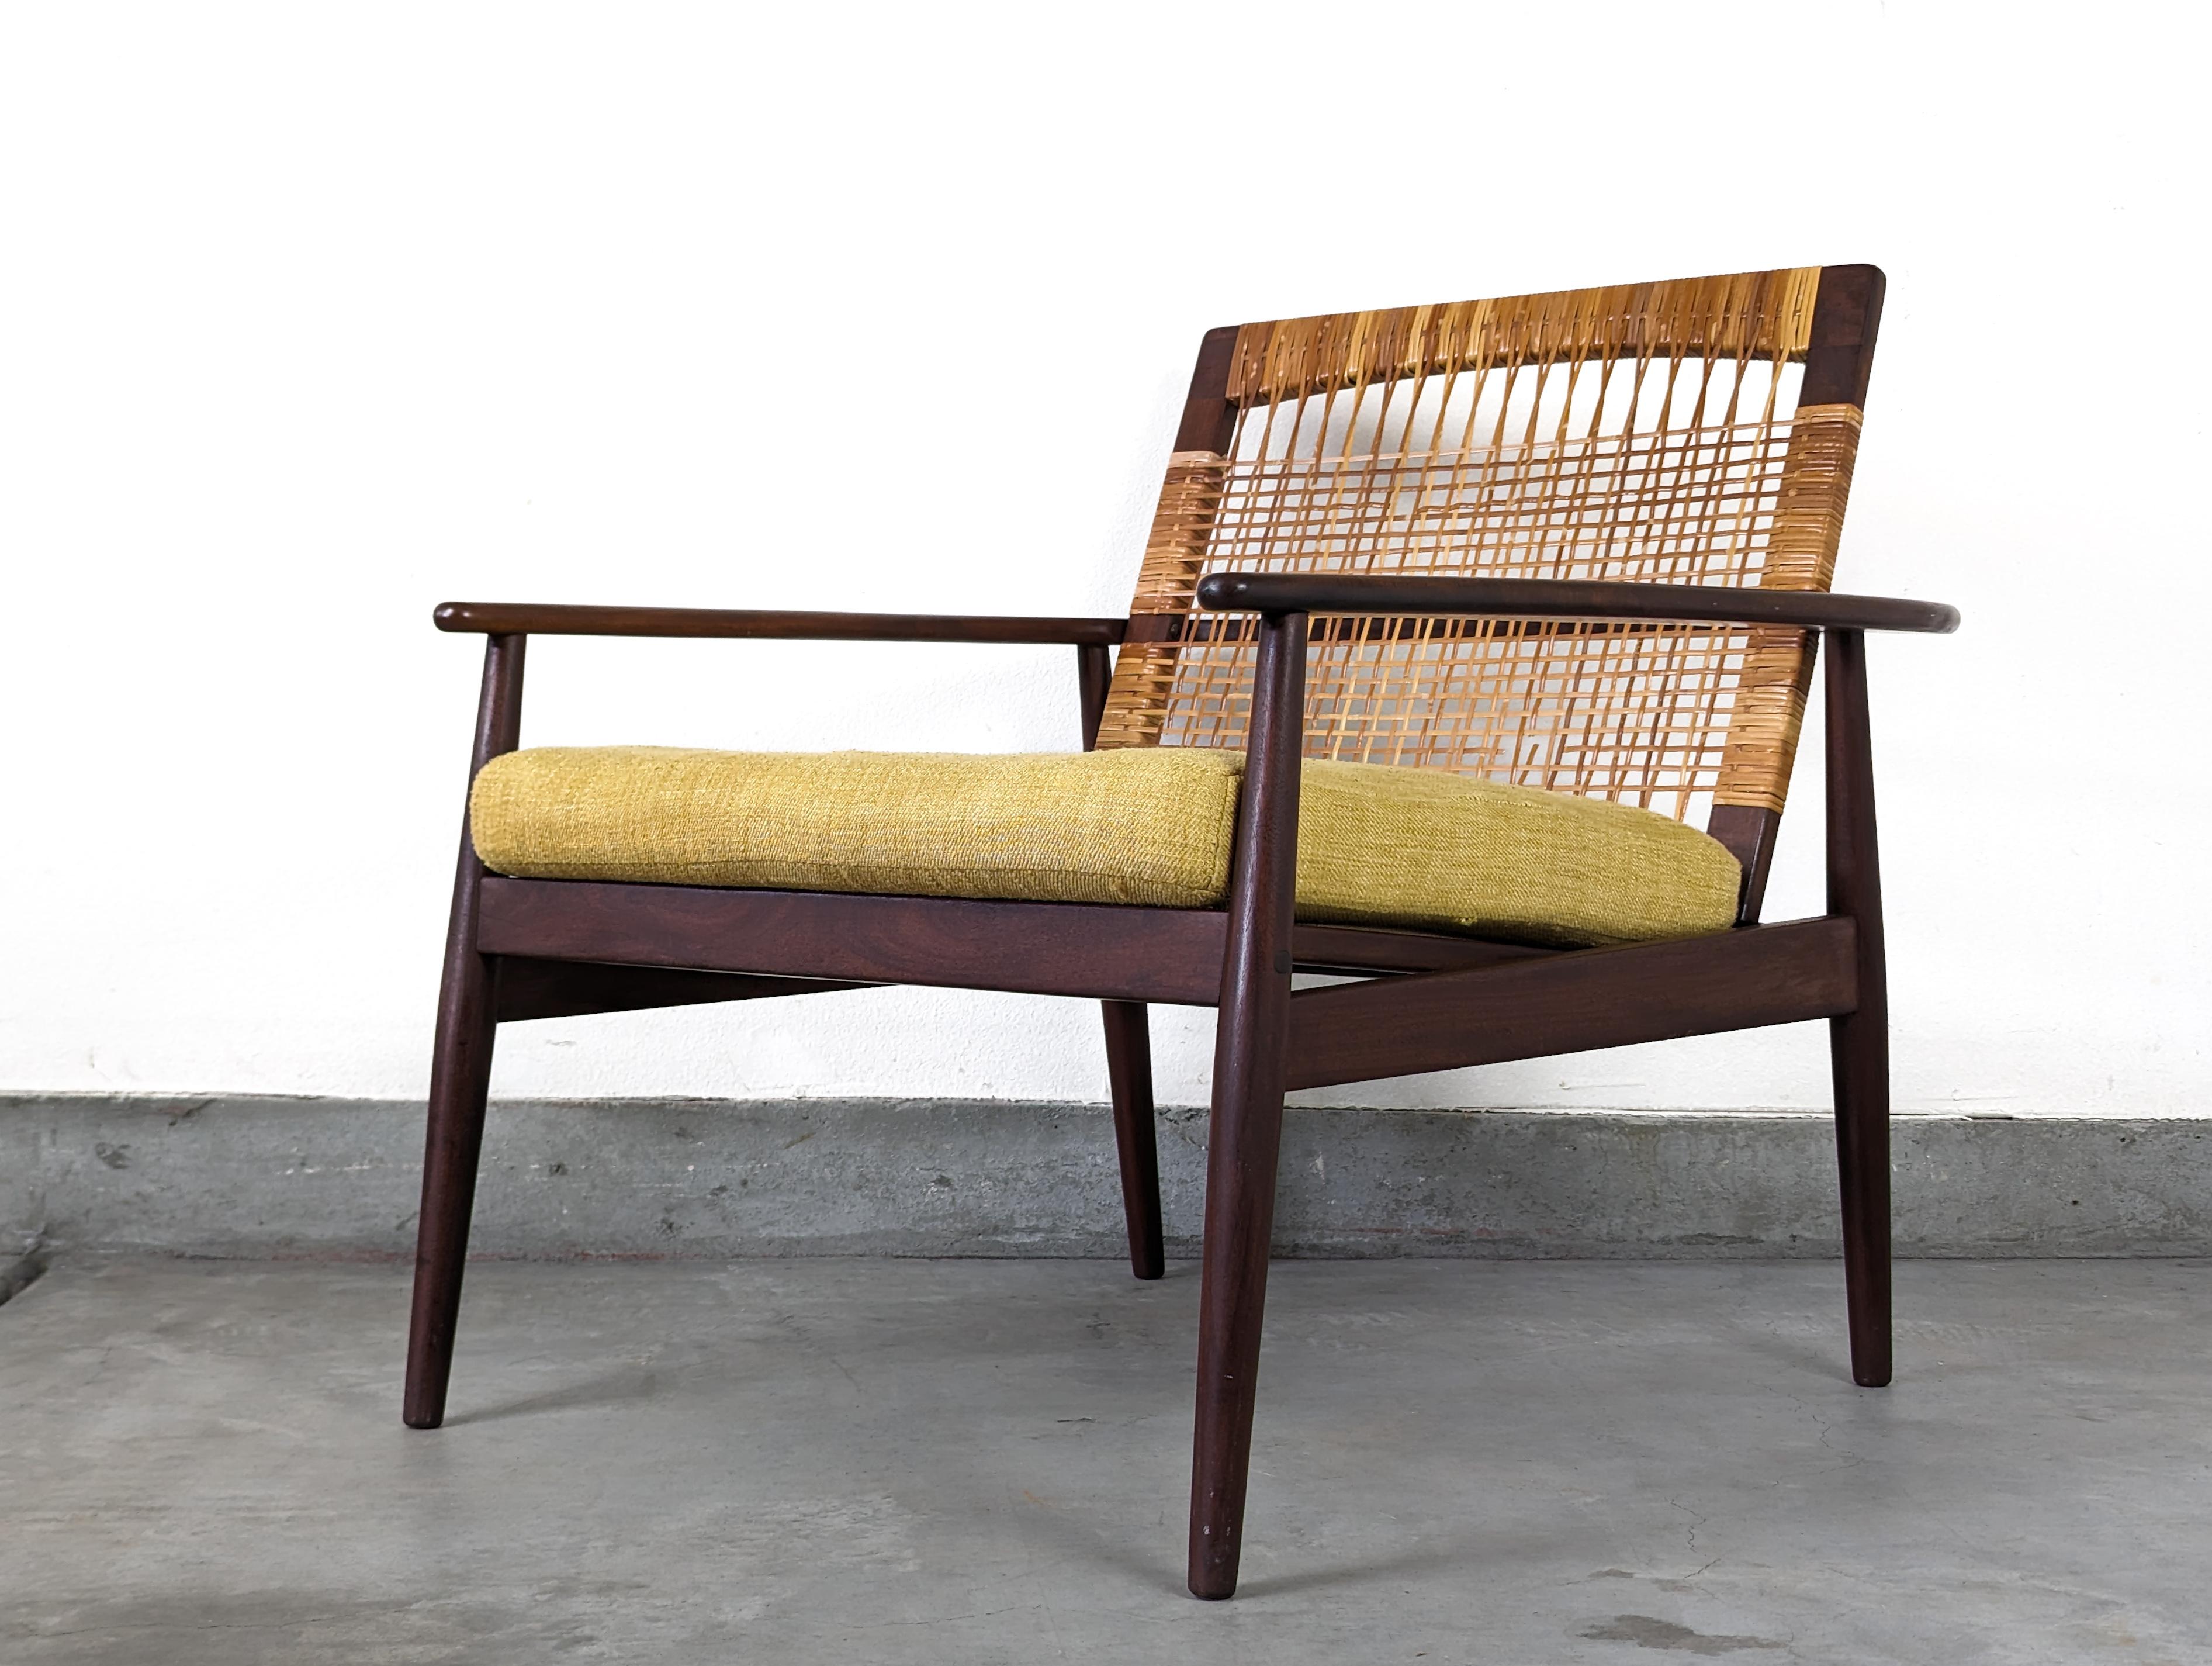 Presenting a rare opportunity to own a piece of mid-century Danish design history - an authentic Hans Olsen armchair for Juul Kristensen. Crafted in Denmark in the vibrant era of the 1960s, this vintage piece is a testament to the enduring appeal of